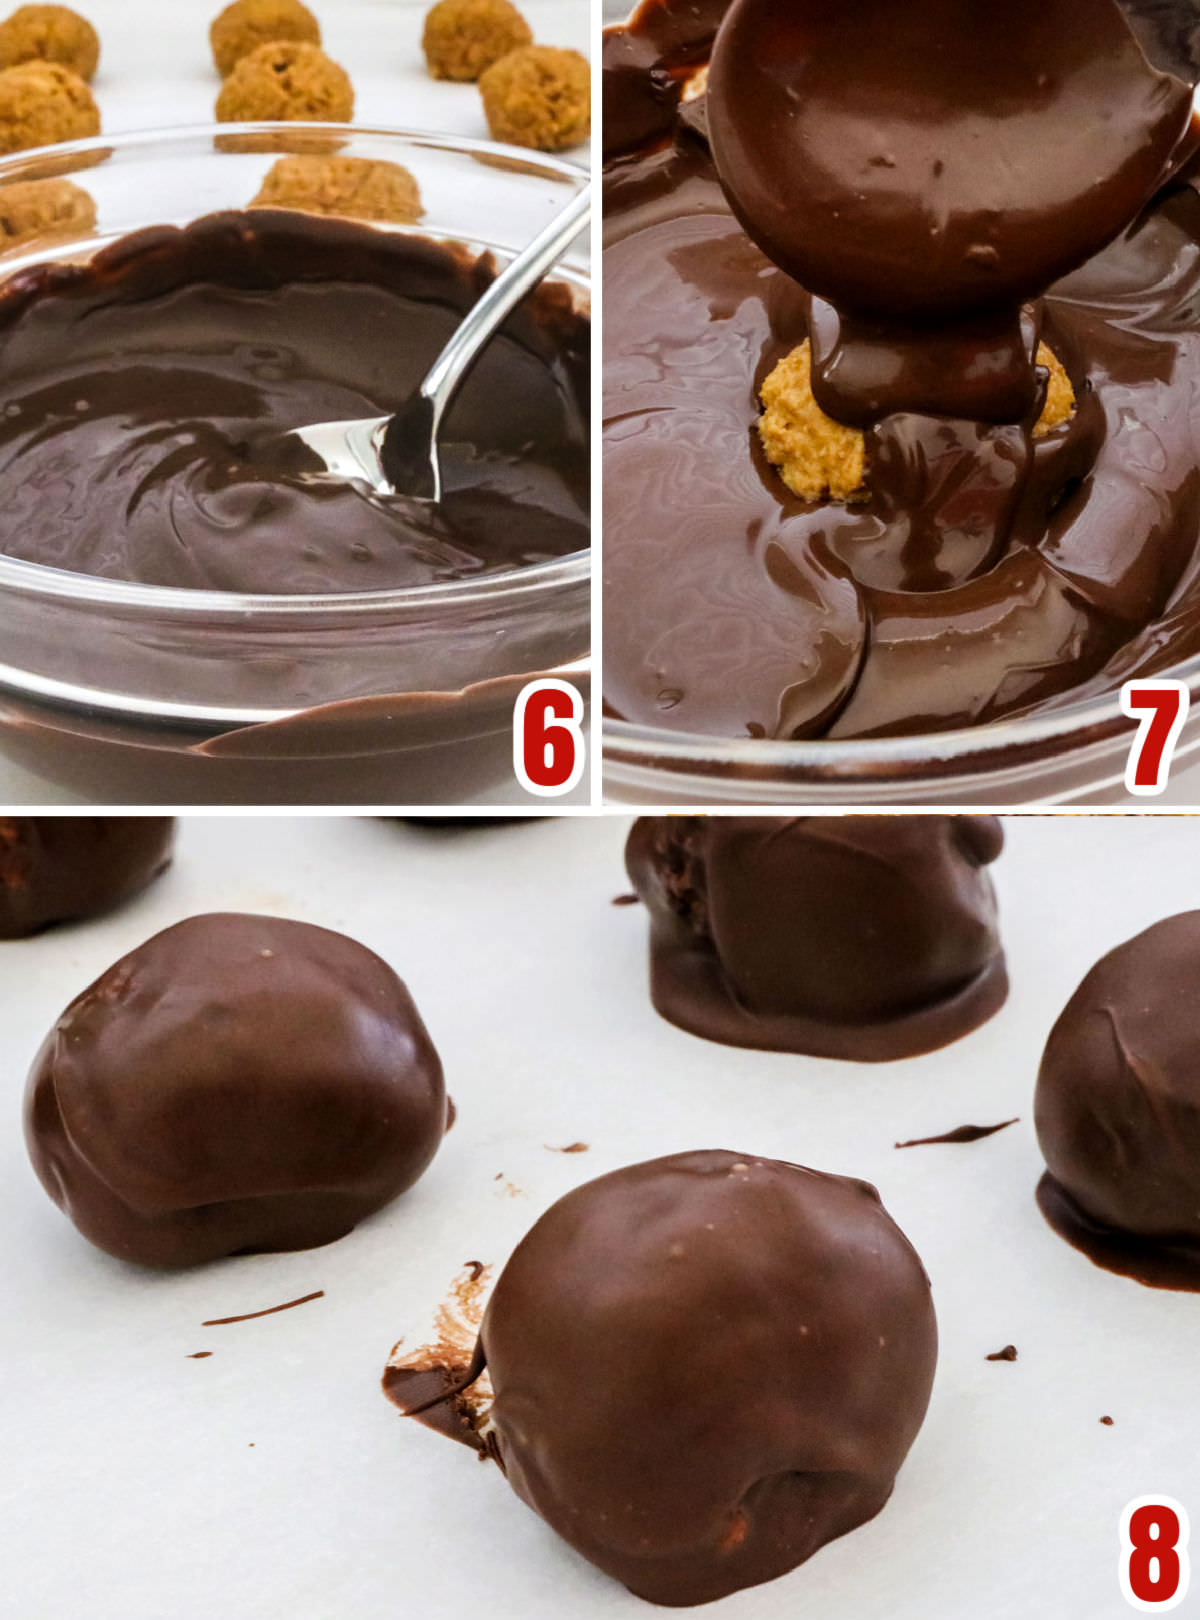 Collage image showing how to cover the peanut butter mixture in chocolate.